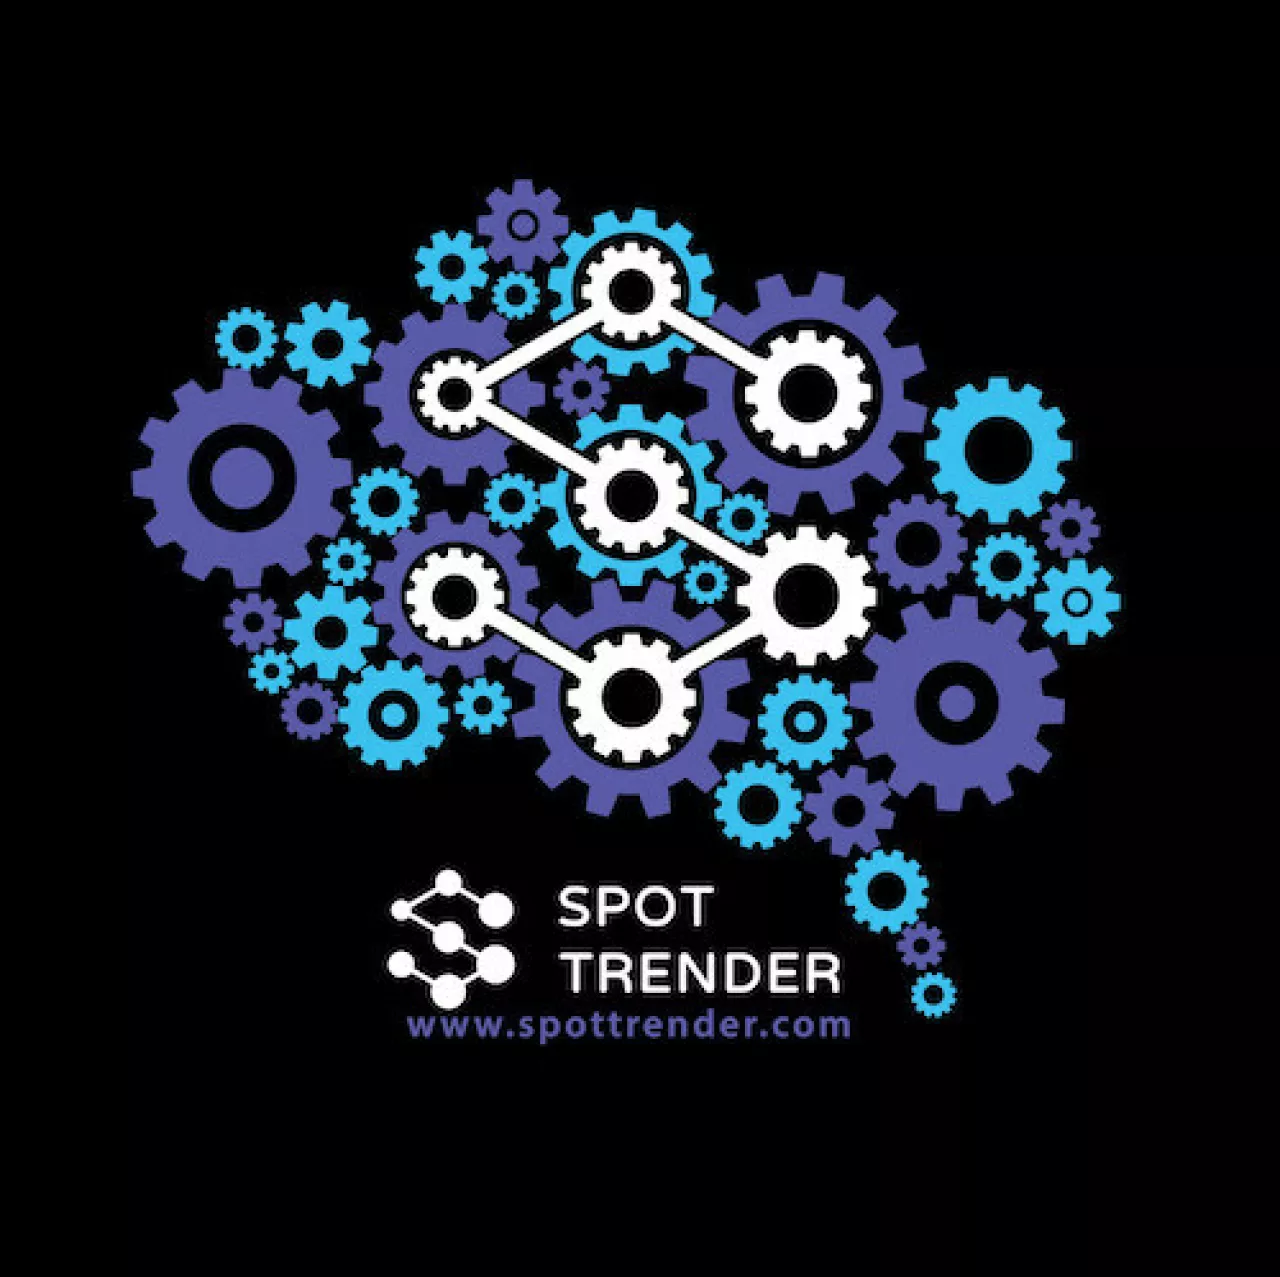 Intelligent ad testing for maximum ROI by Spot Trender's new software. logo img#1